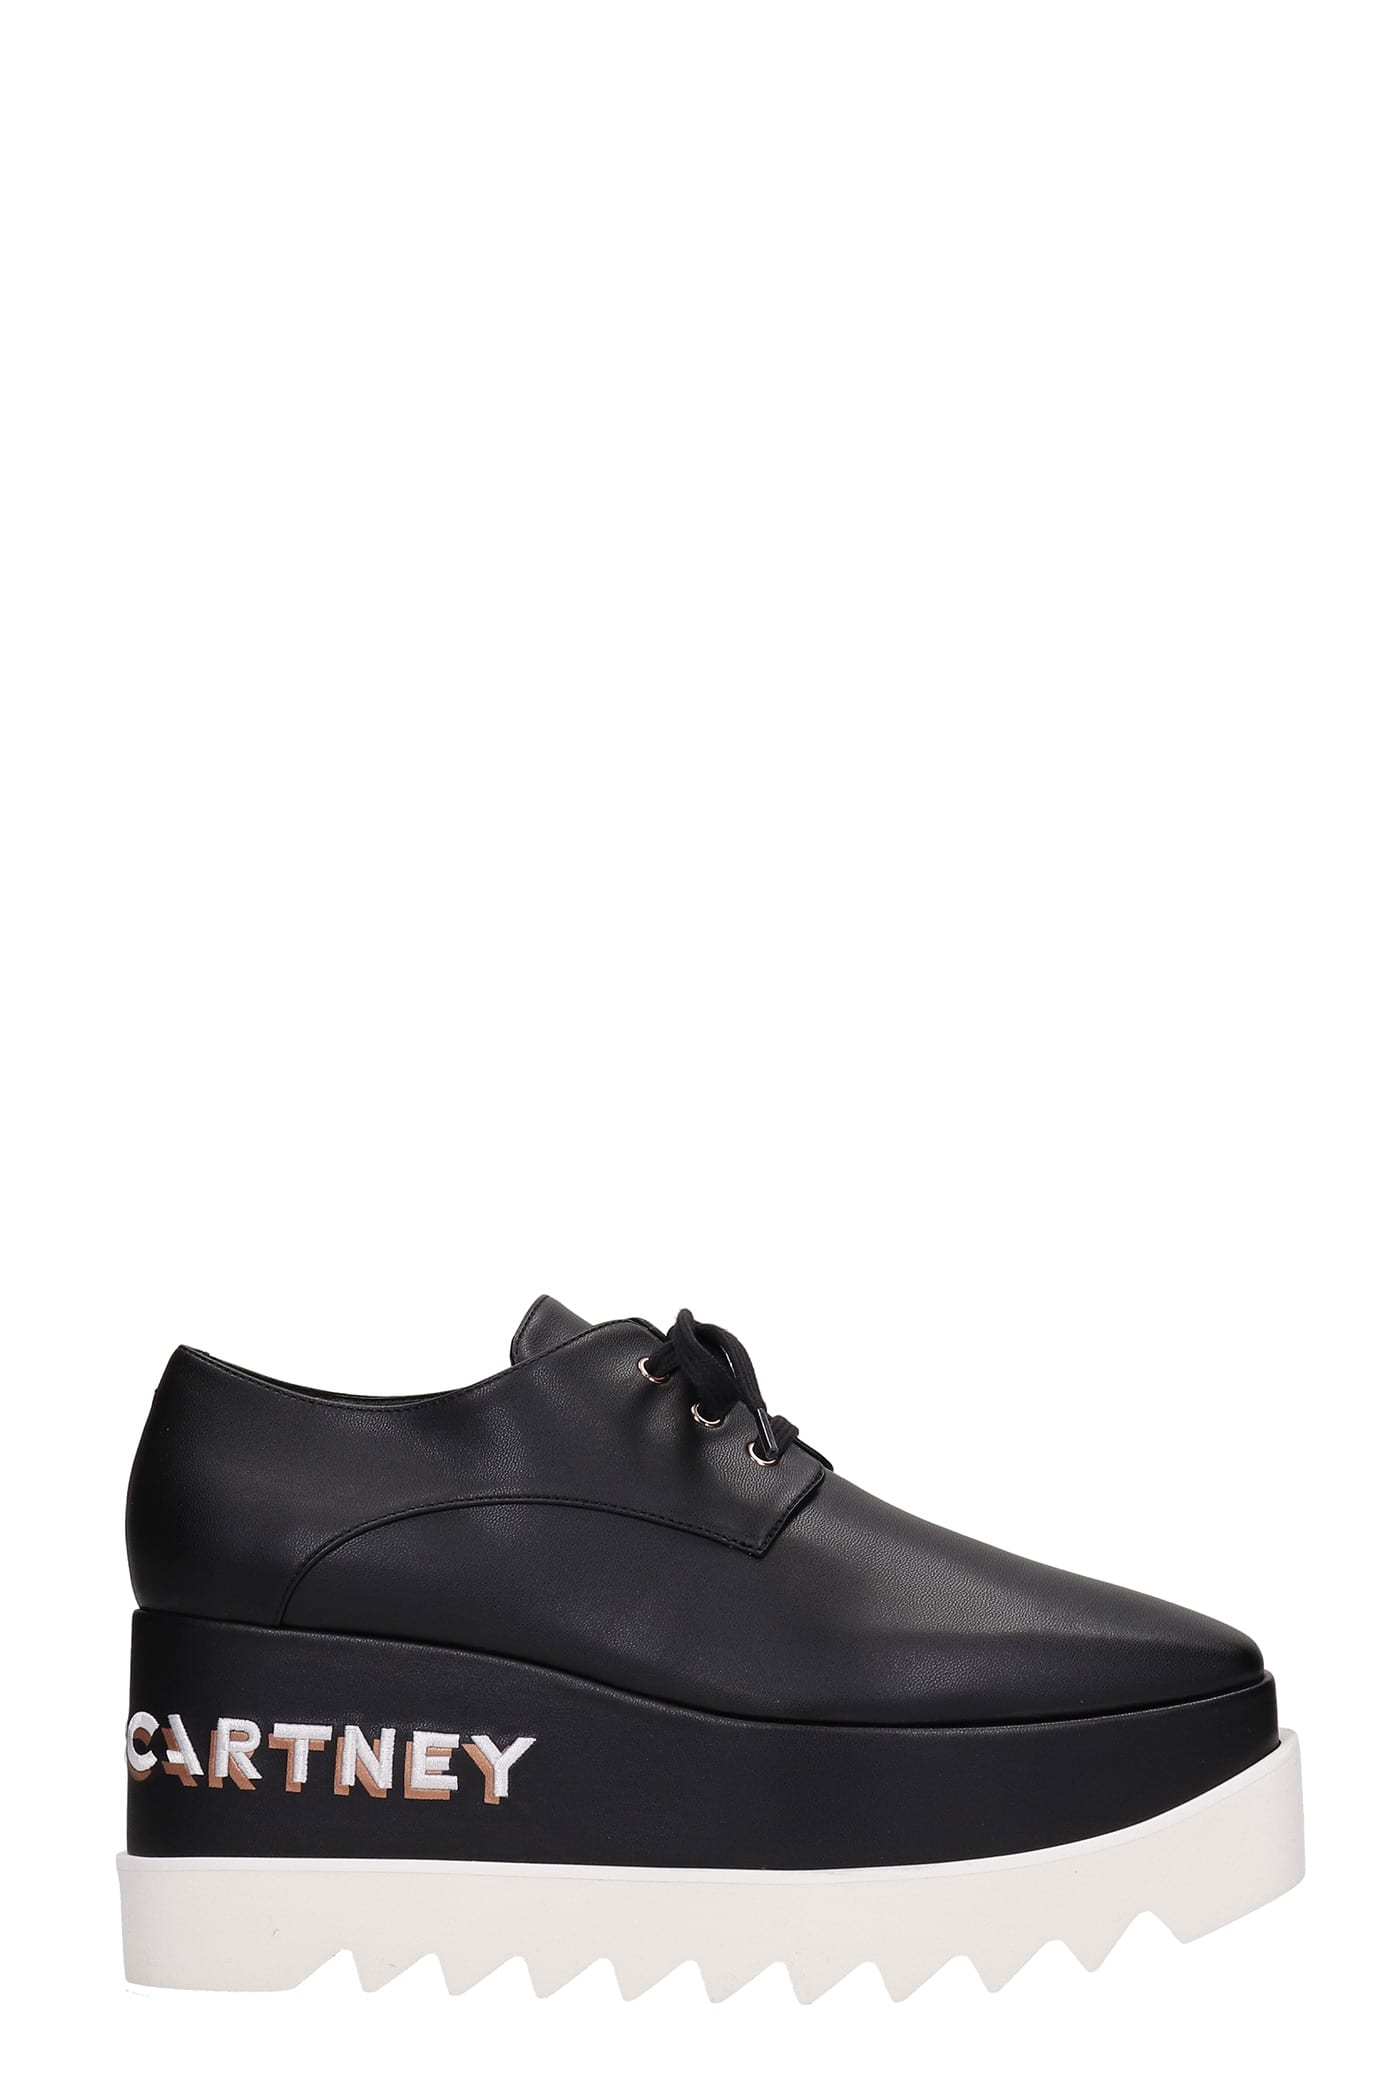 Stella McCartney Elyse Logo Lace Up Shoes In Black Faux Leather